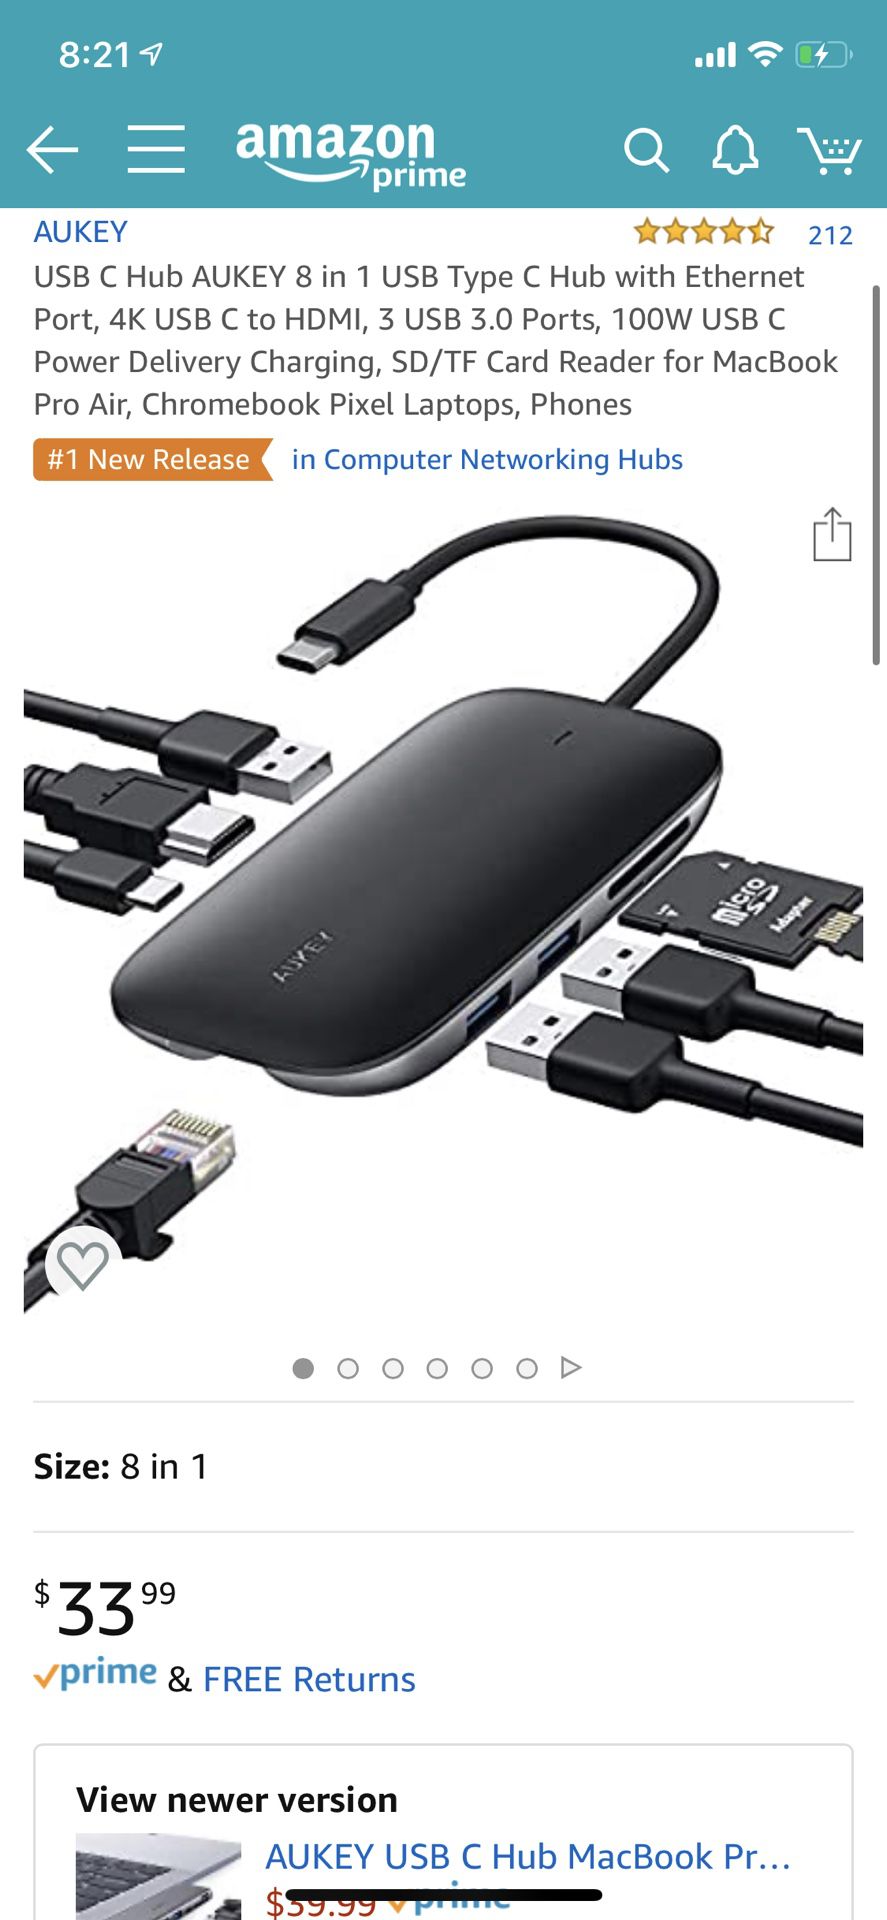 USB C Hub AUKEY 8 in 1 USB Type C Hub with Ethernet Port, 4K USB C to HDMI, 3 USB 3.0 Ports, 100W USB C Power Delivery Charging, SD/TF Card Reader fo